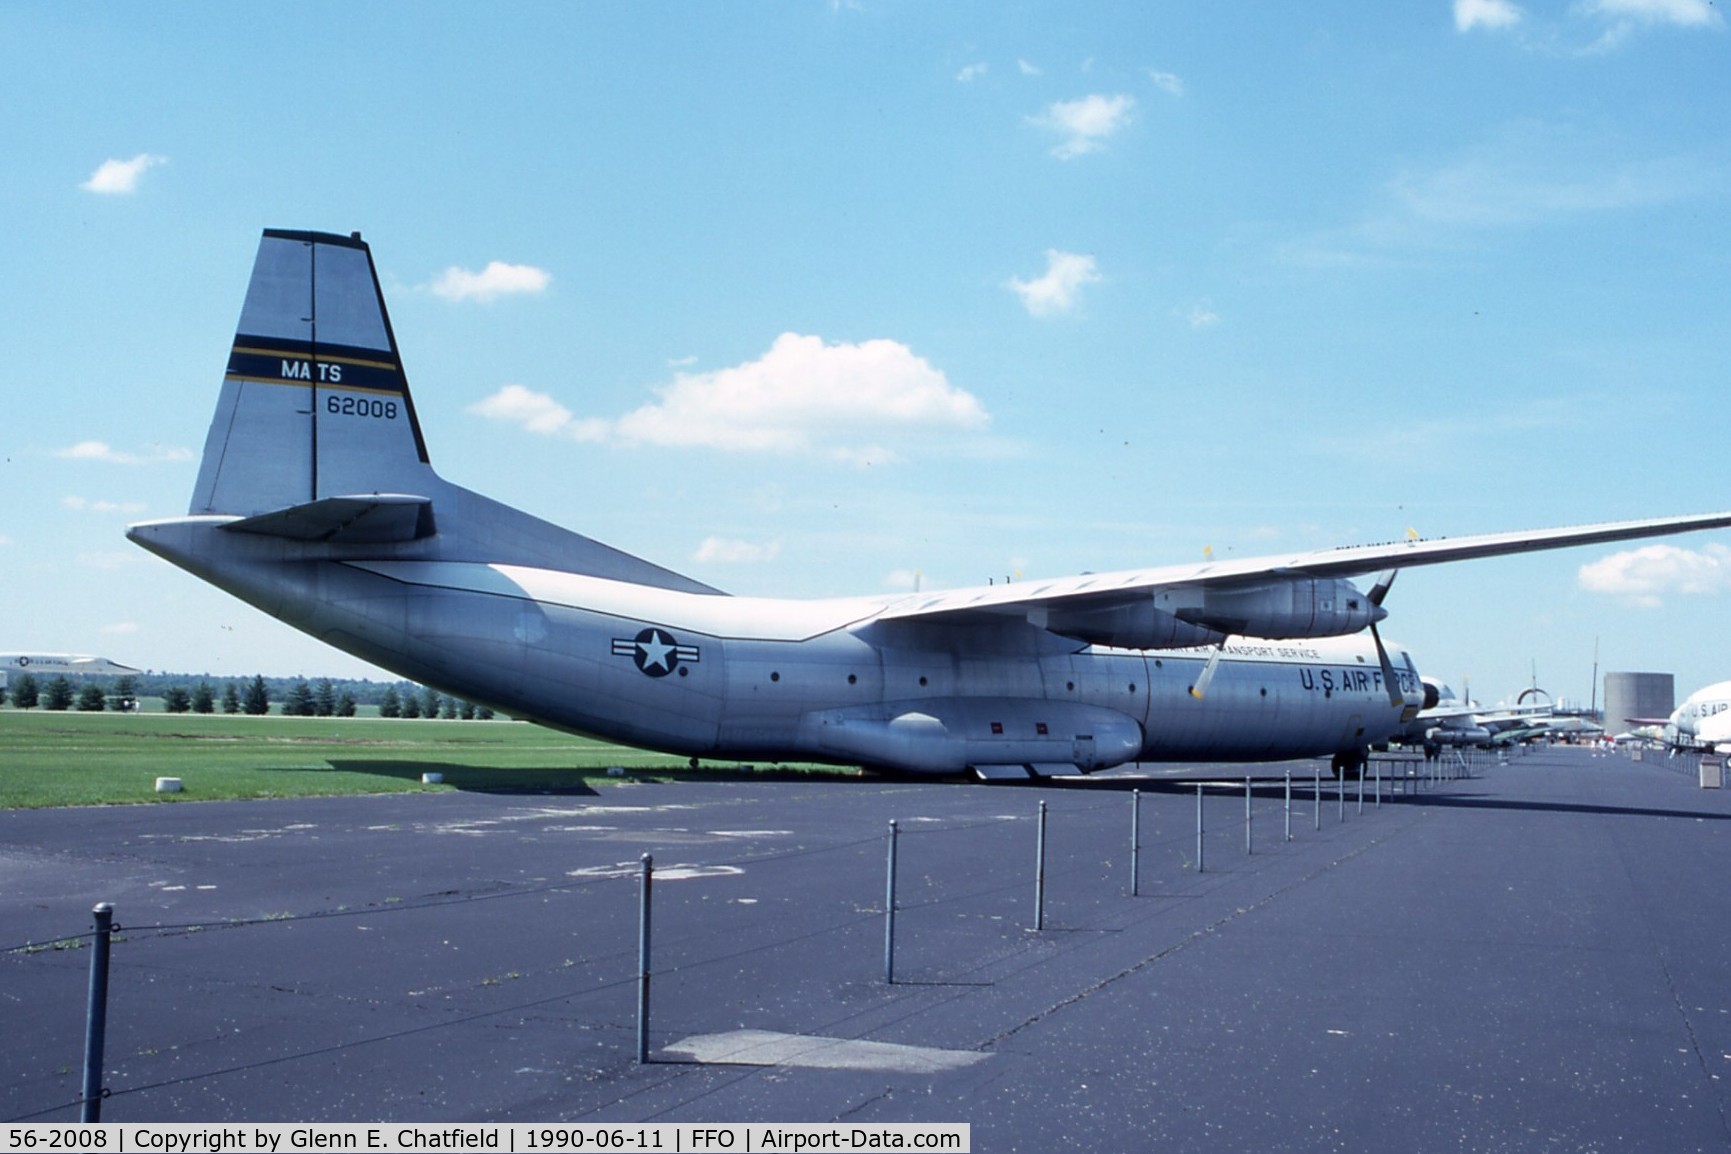 56-2008, 1956 Douglas C-133A-25-DL Cargomaster C/N 45245, C-133A at the National Museum of the U.S. Air Force